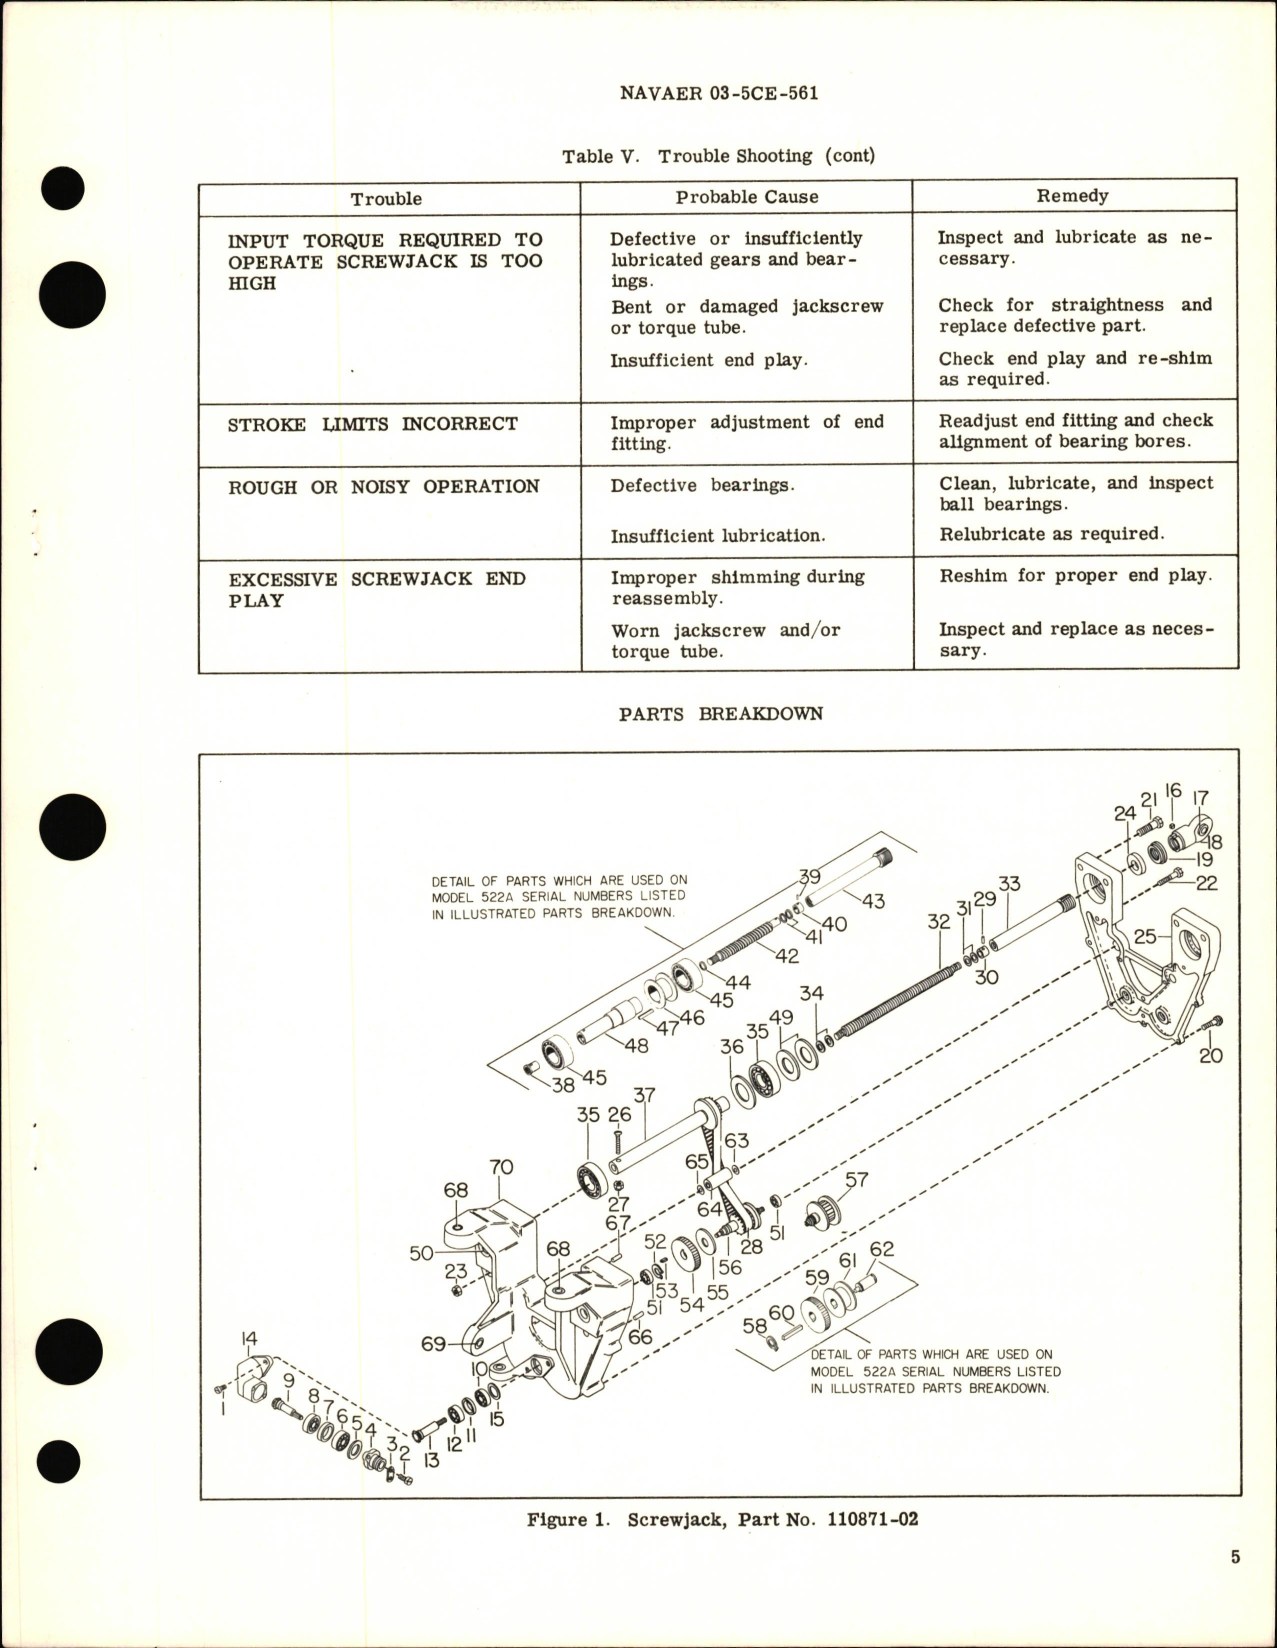 Sample page 5 from AirCorps Library document: Overhaul Instructions with Parts Breakdown for Screwjack - Part 110871-02